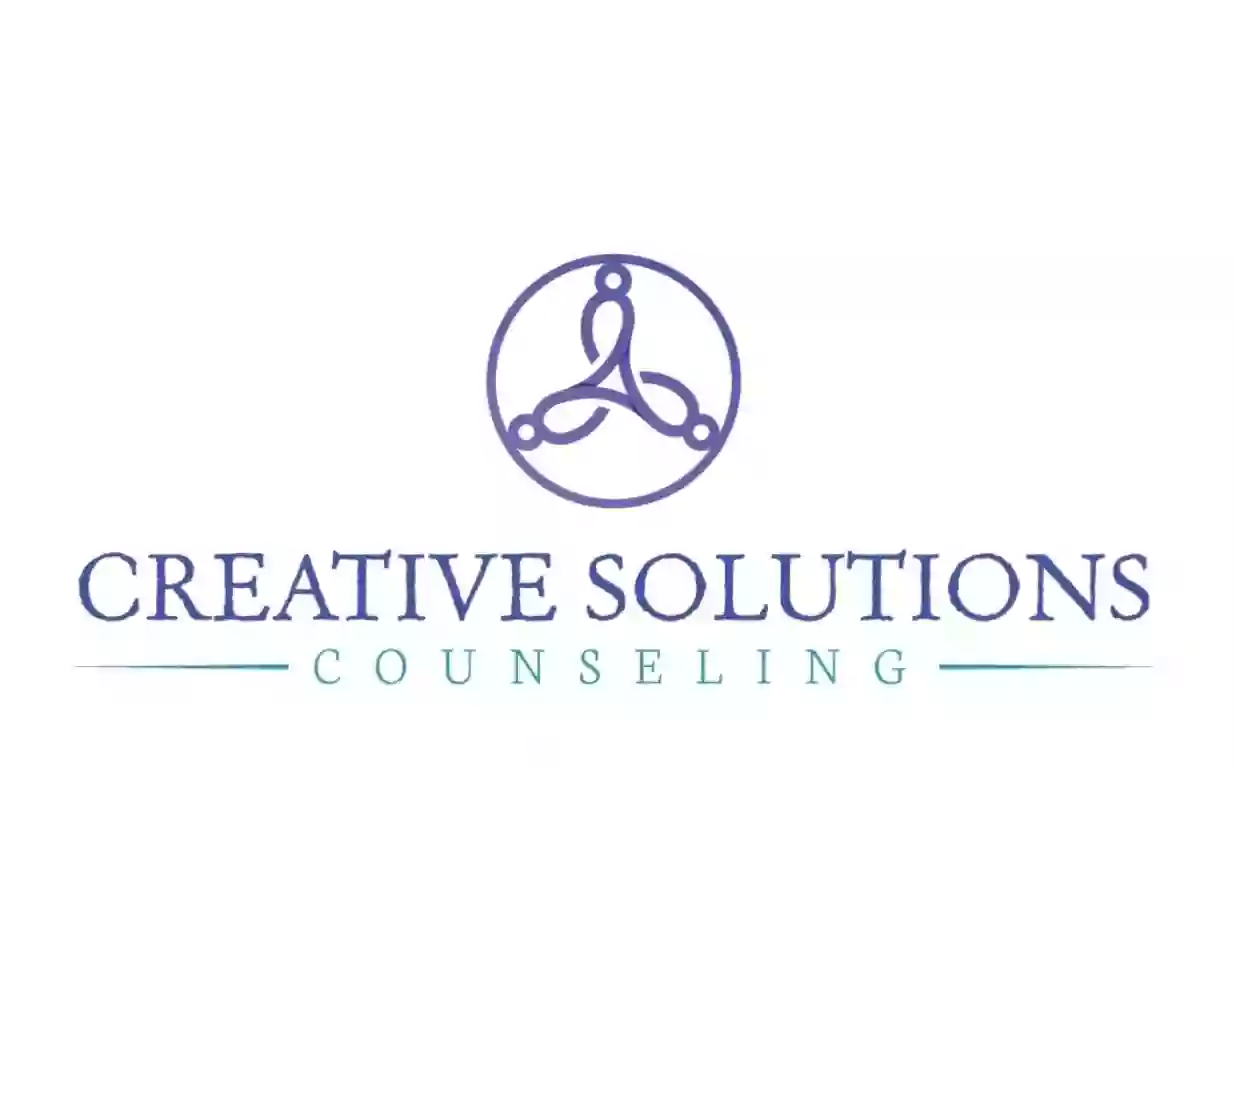 Creative Solutions Counseling